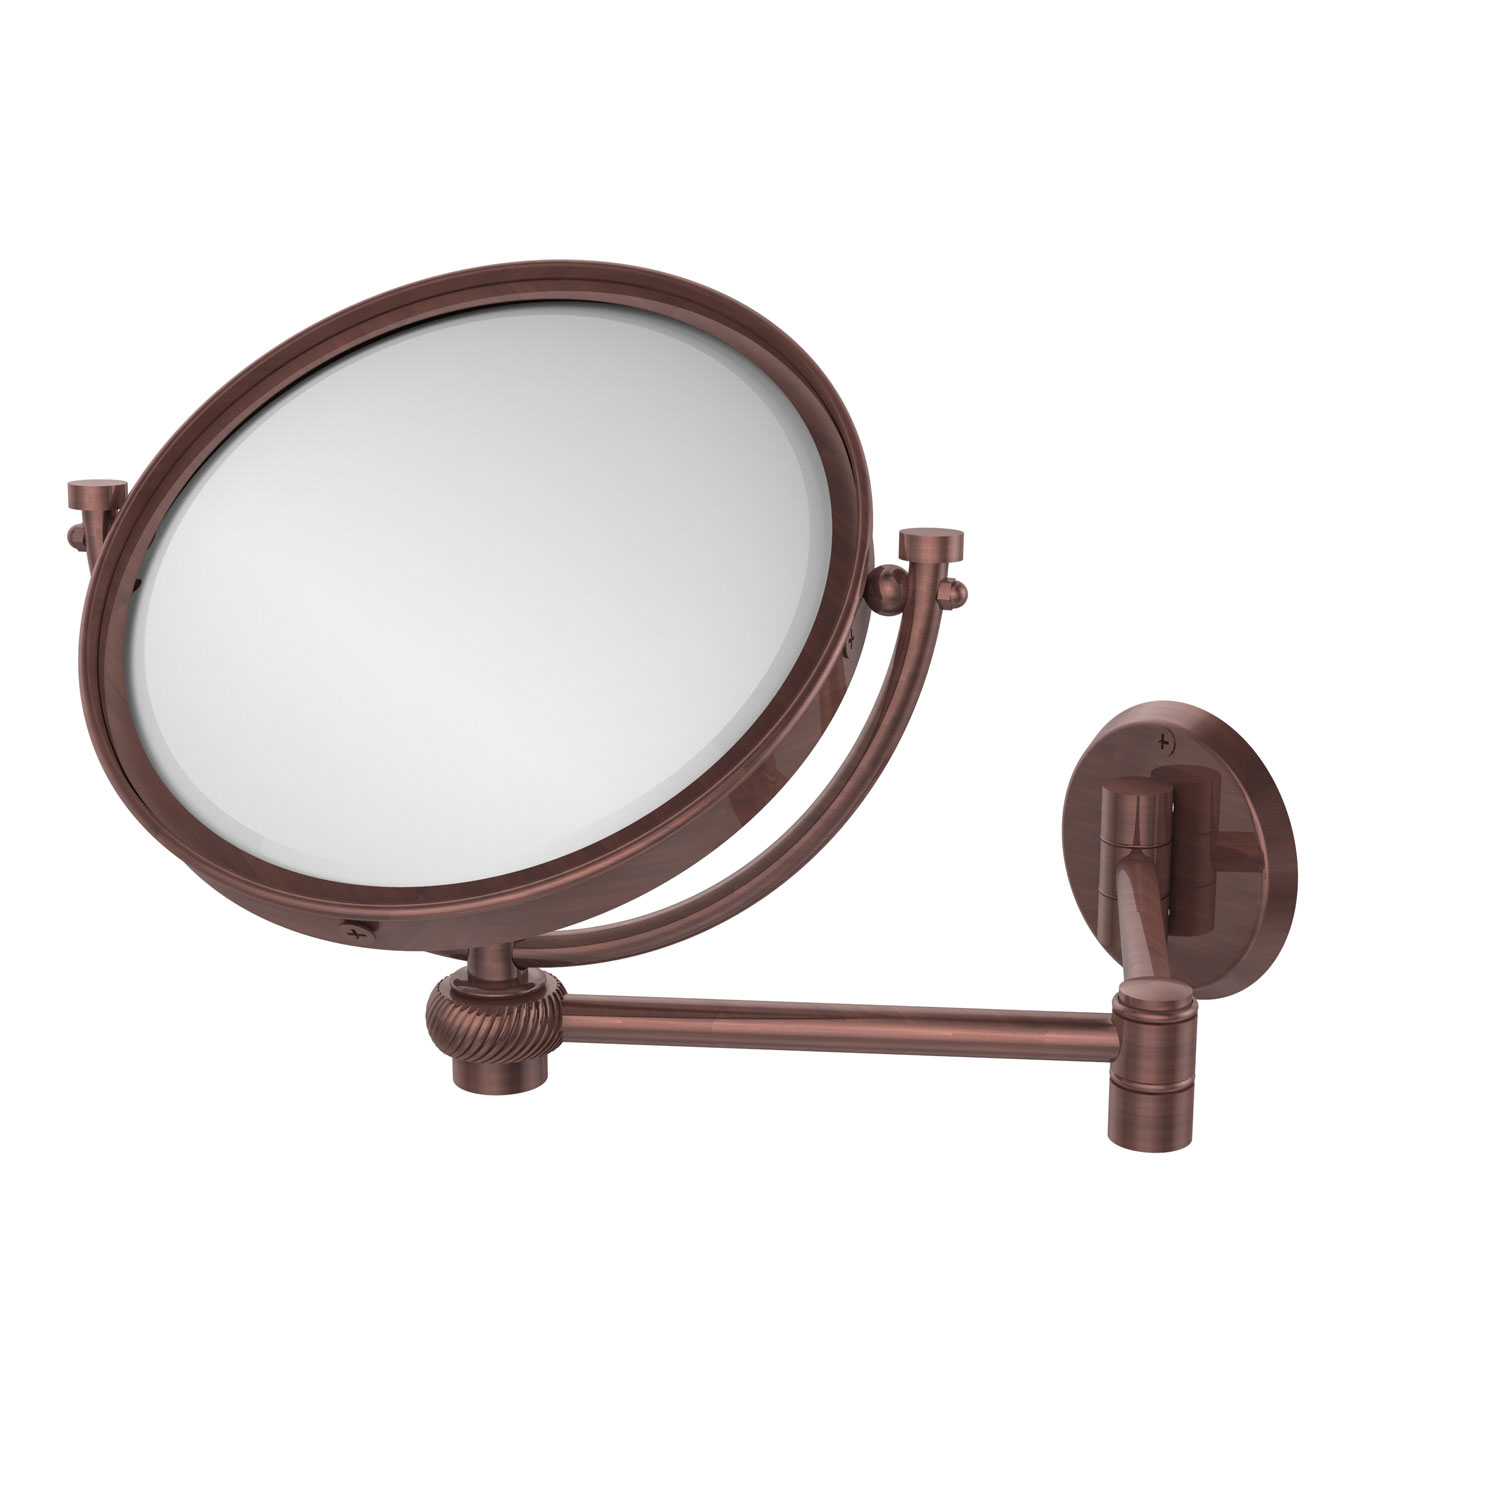 8 Inch Wall Mounted Extending Make-Up Mirror 2X Magnification With Twist Accent, Antique Copper